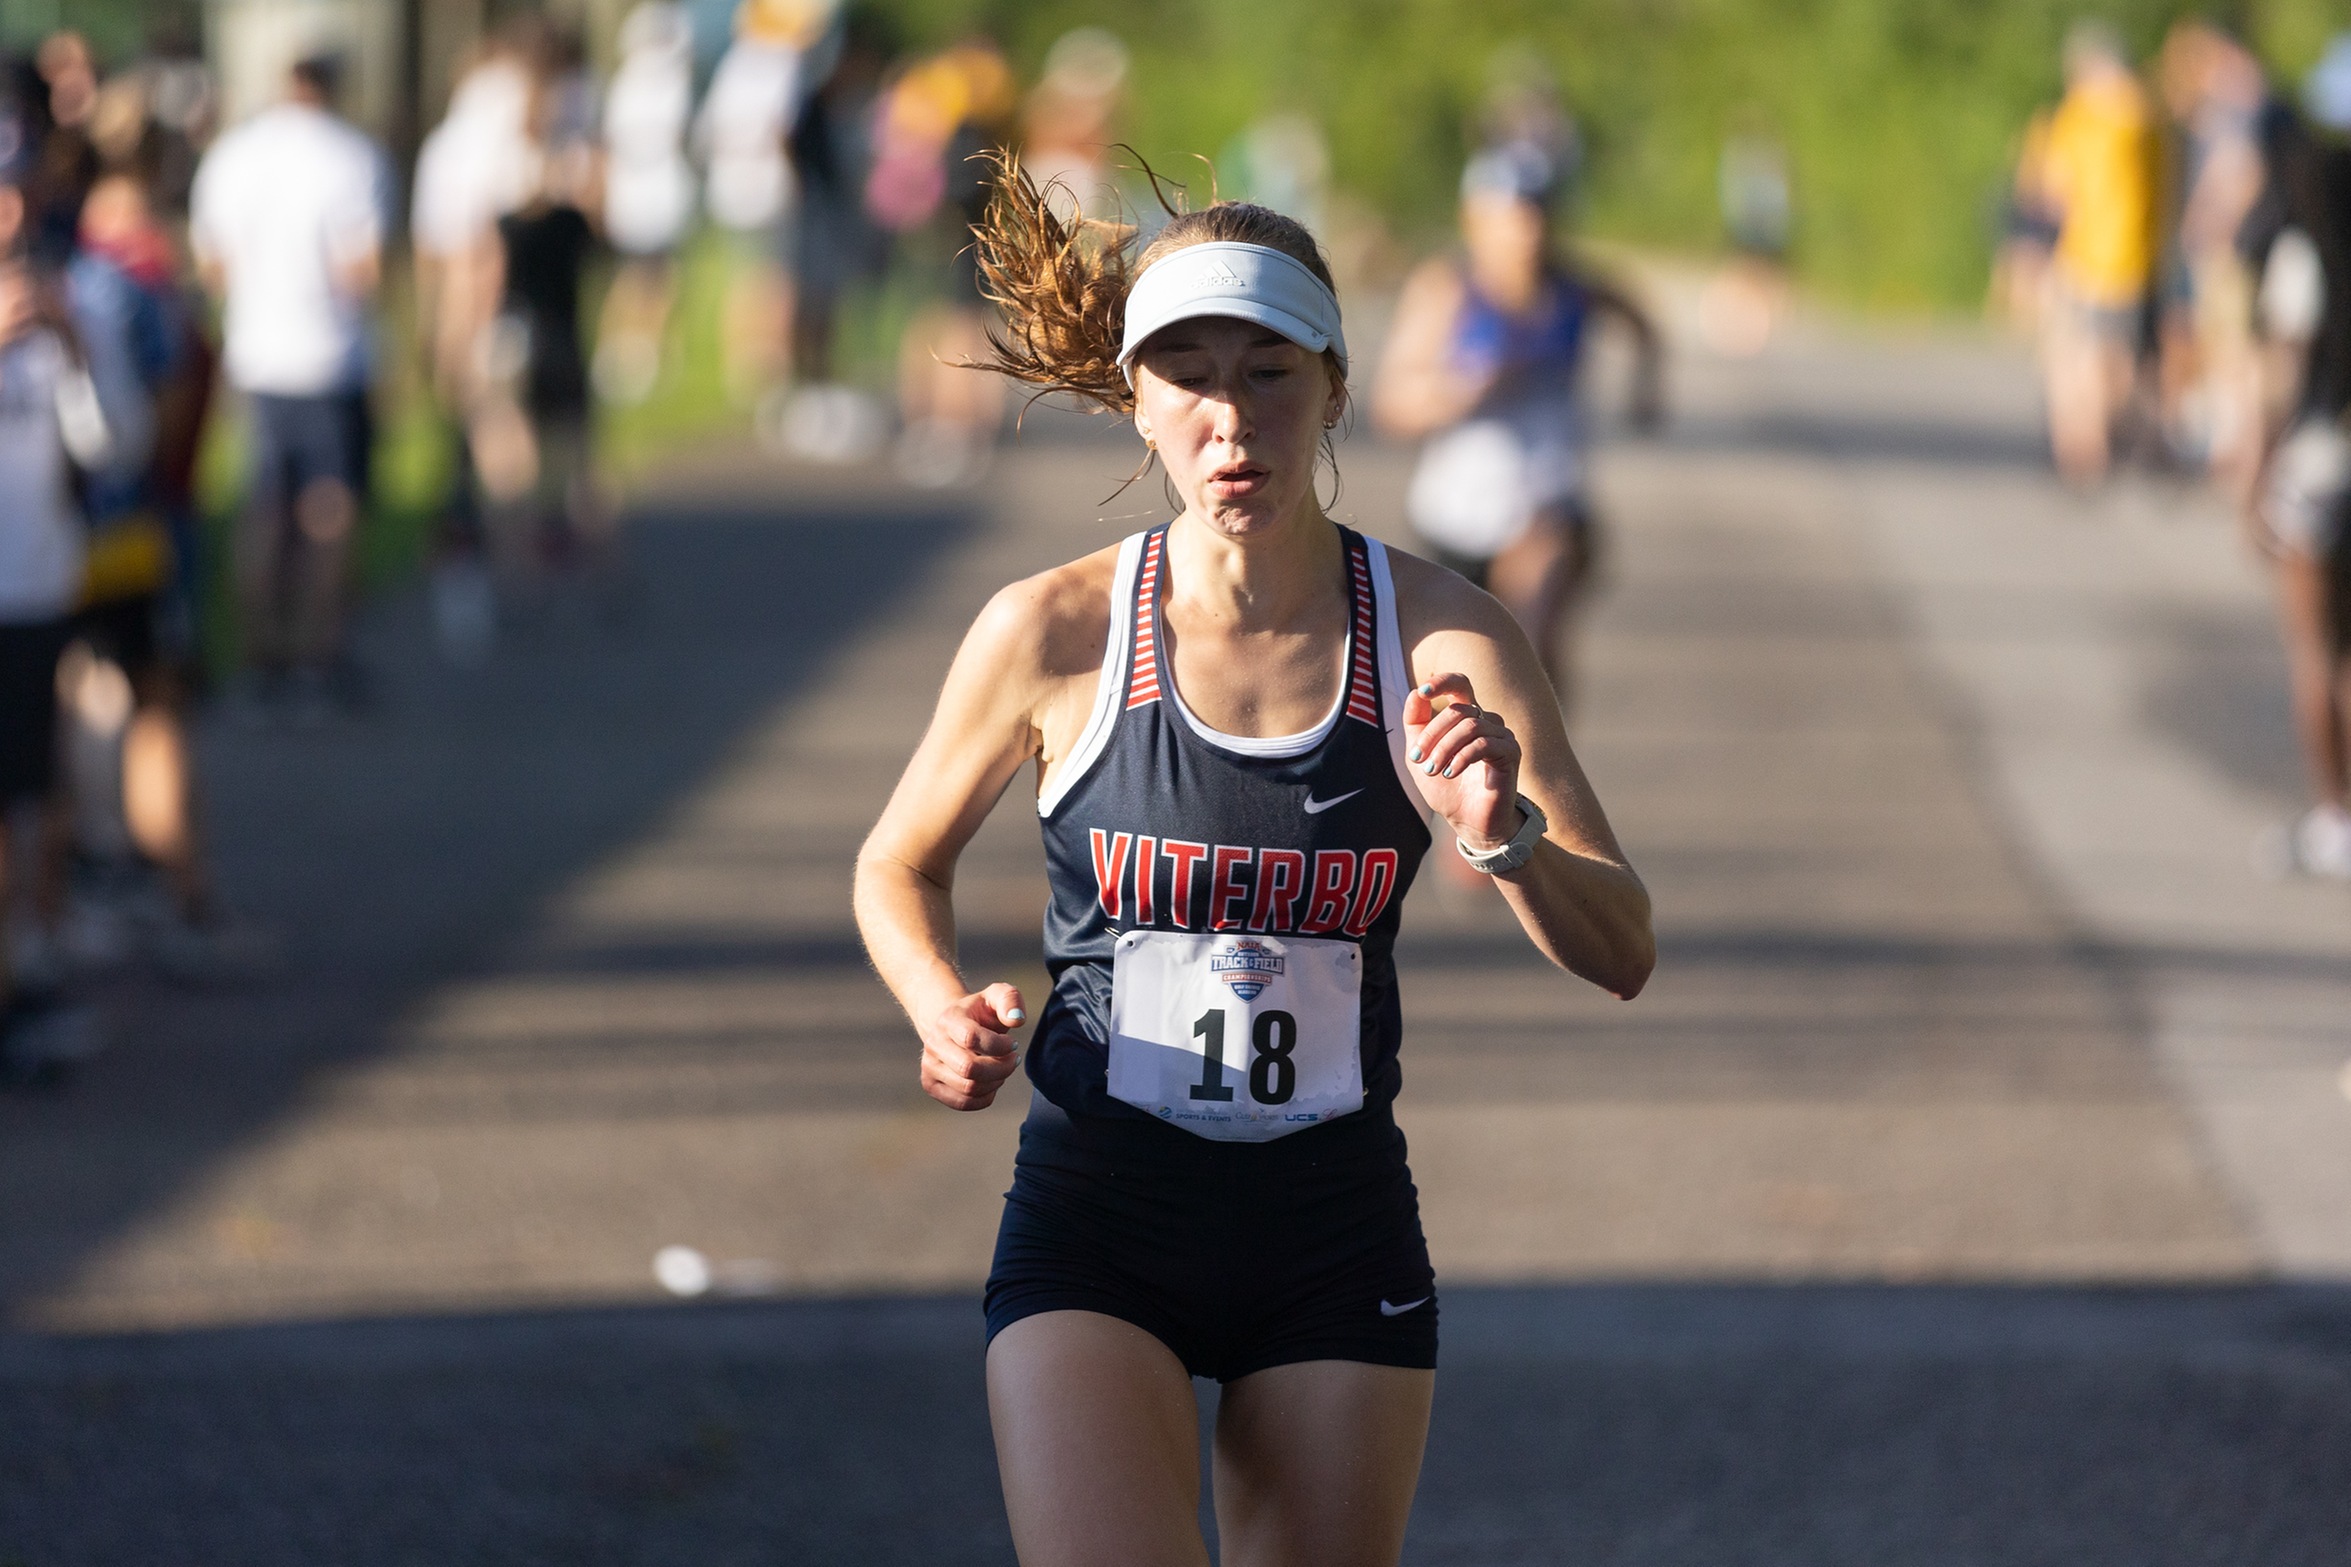 McDonough Places 15th at Nationals in the Half-Marathon